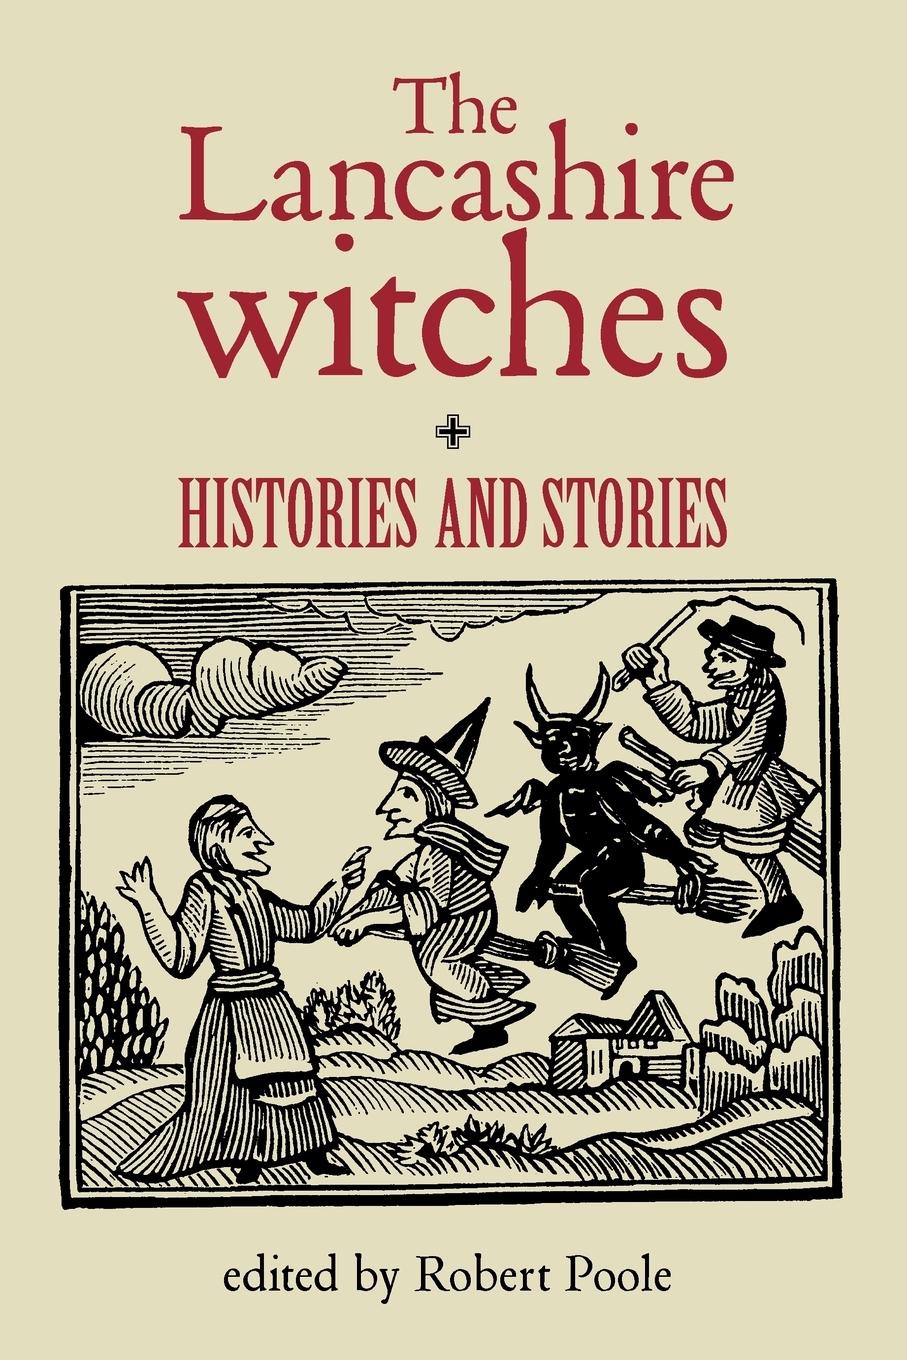 The Lancashire Witches / Histories and Stories / Robert Poole / Taschenbuch / Paperback / Englisch / 2003 / Manchester University Press / EAN 9780719062049 - Poole, Robert